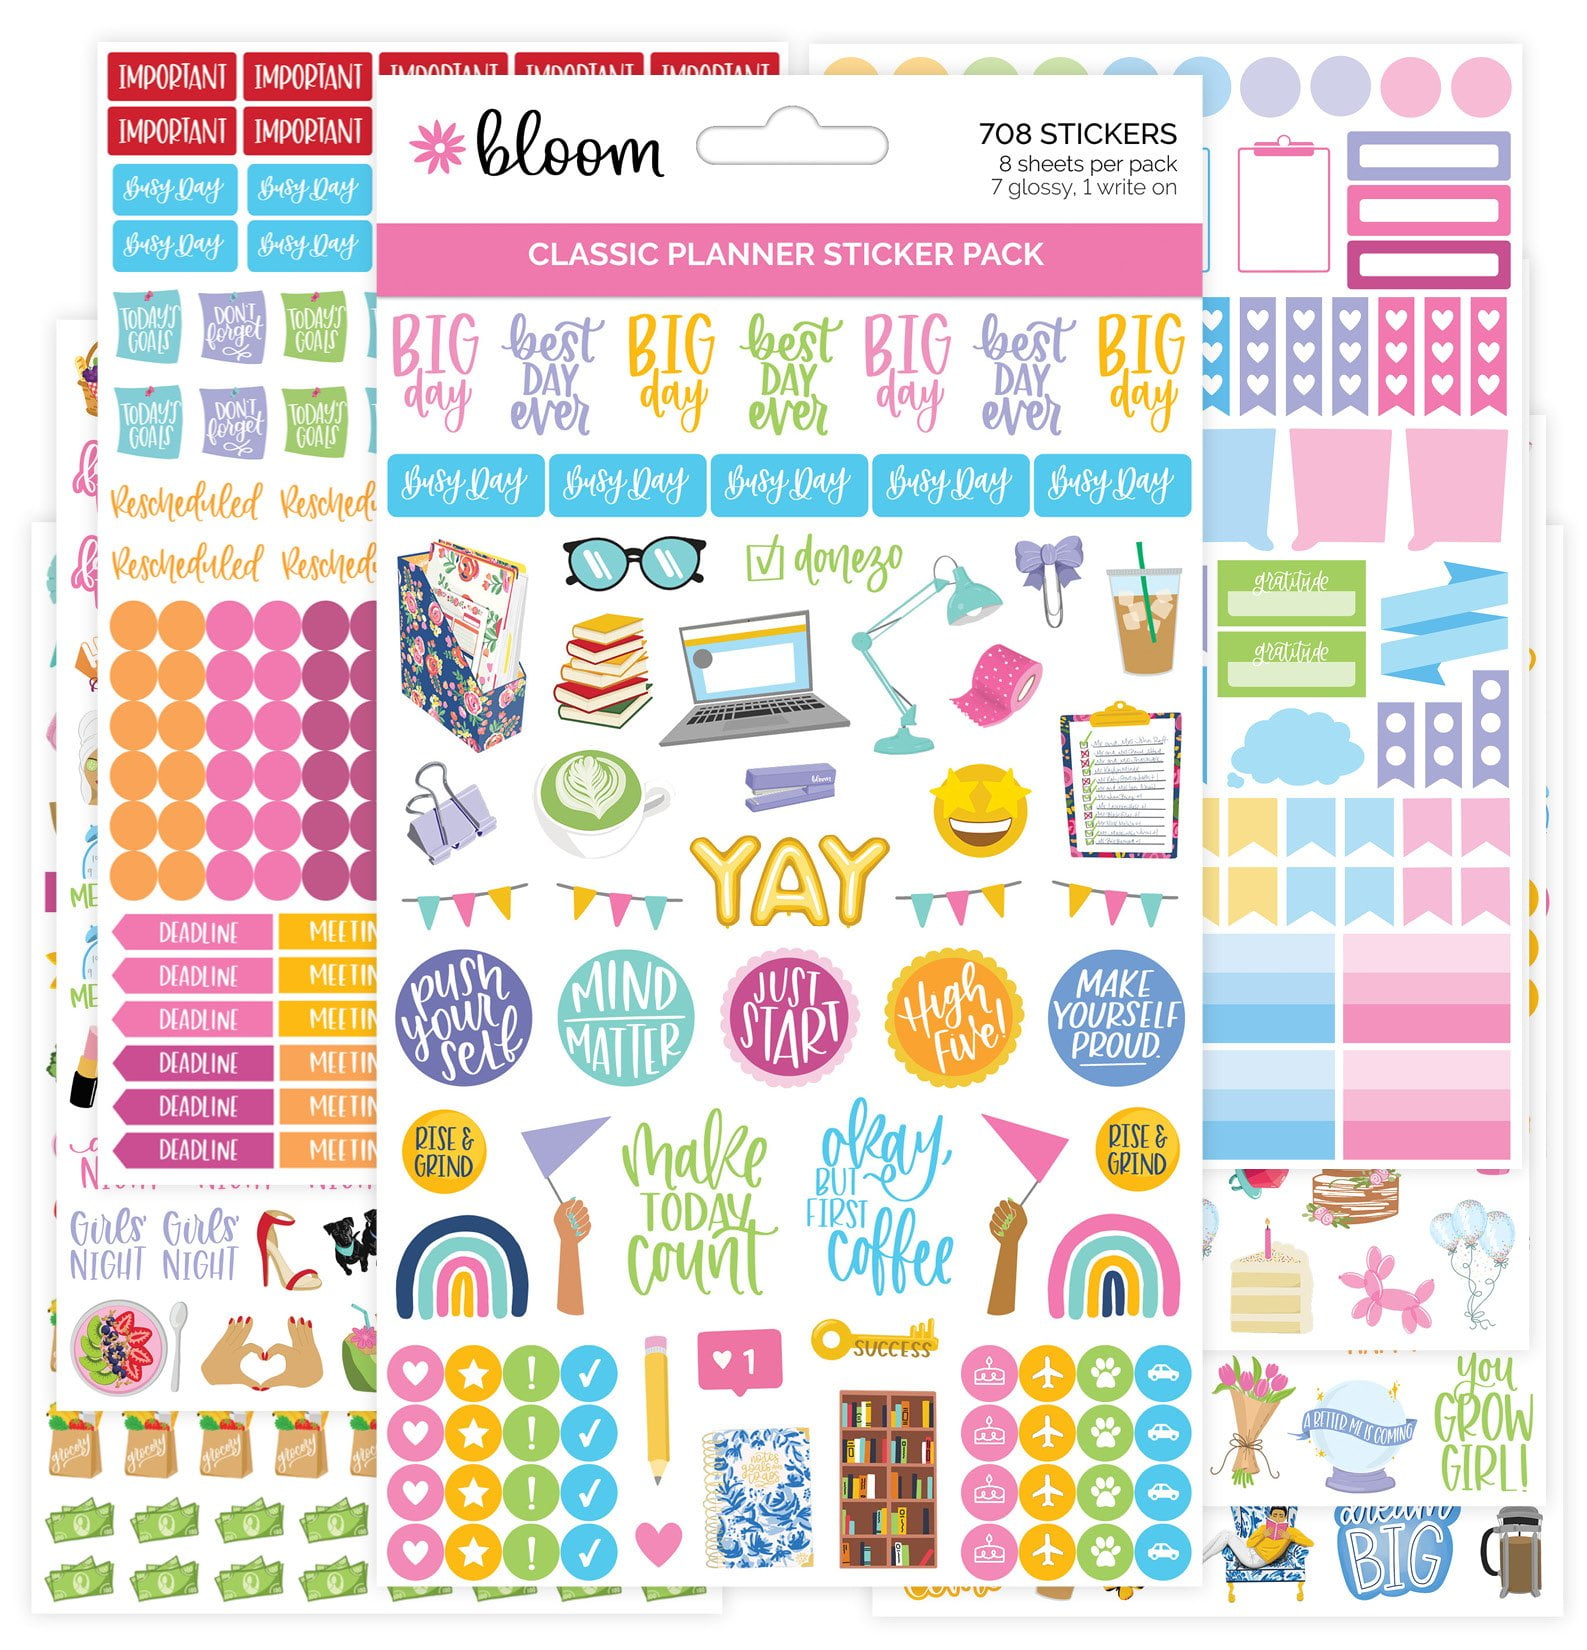 GENEMA Productivity Mini Icons Planner Stickers Decals for Adult